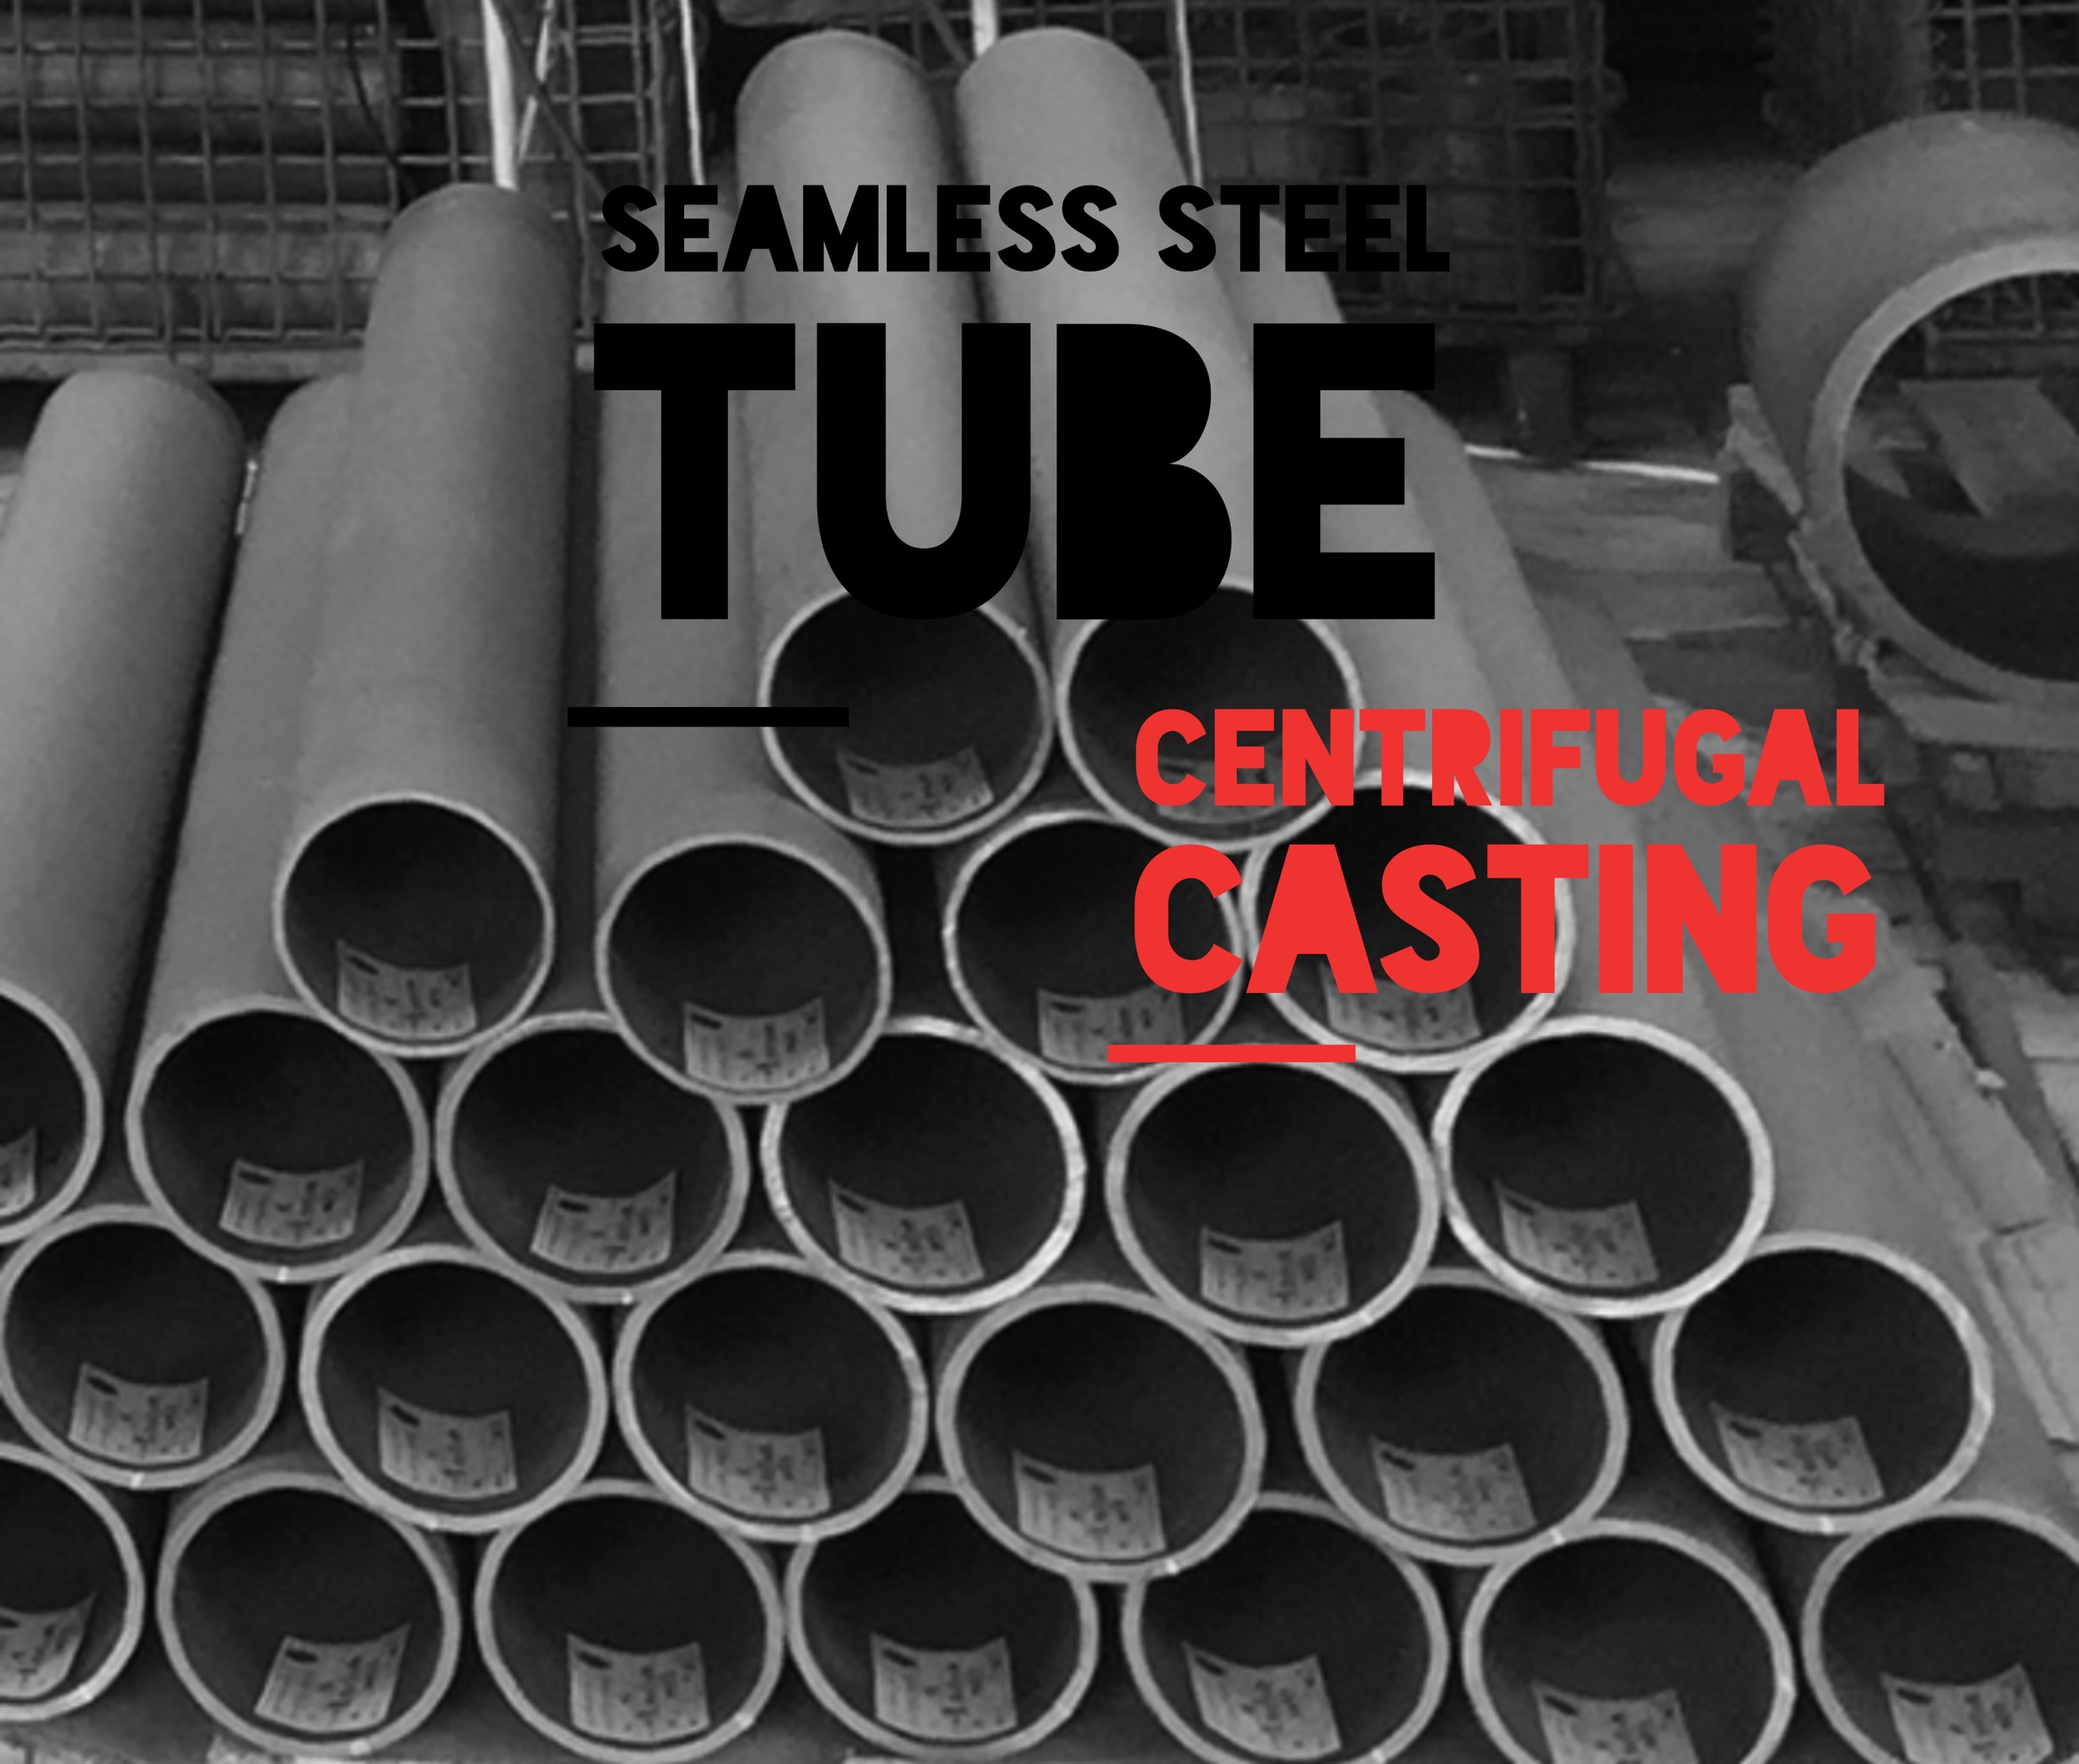 LAWAI INDUSTRIAL CORP. is the Taiwan seamless steel tube manufacturer